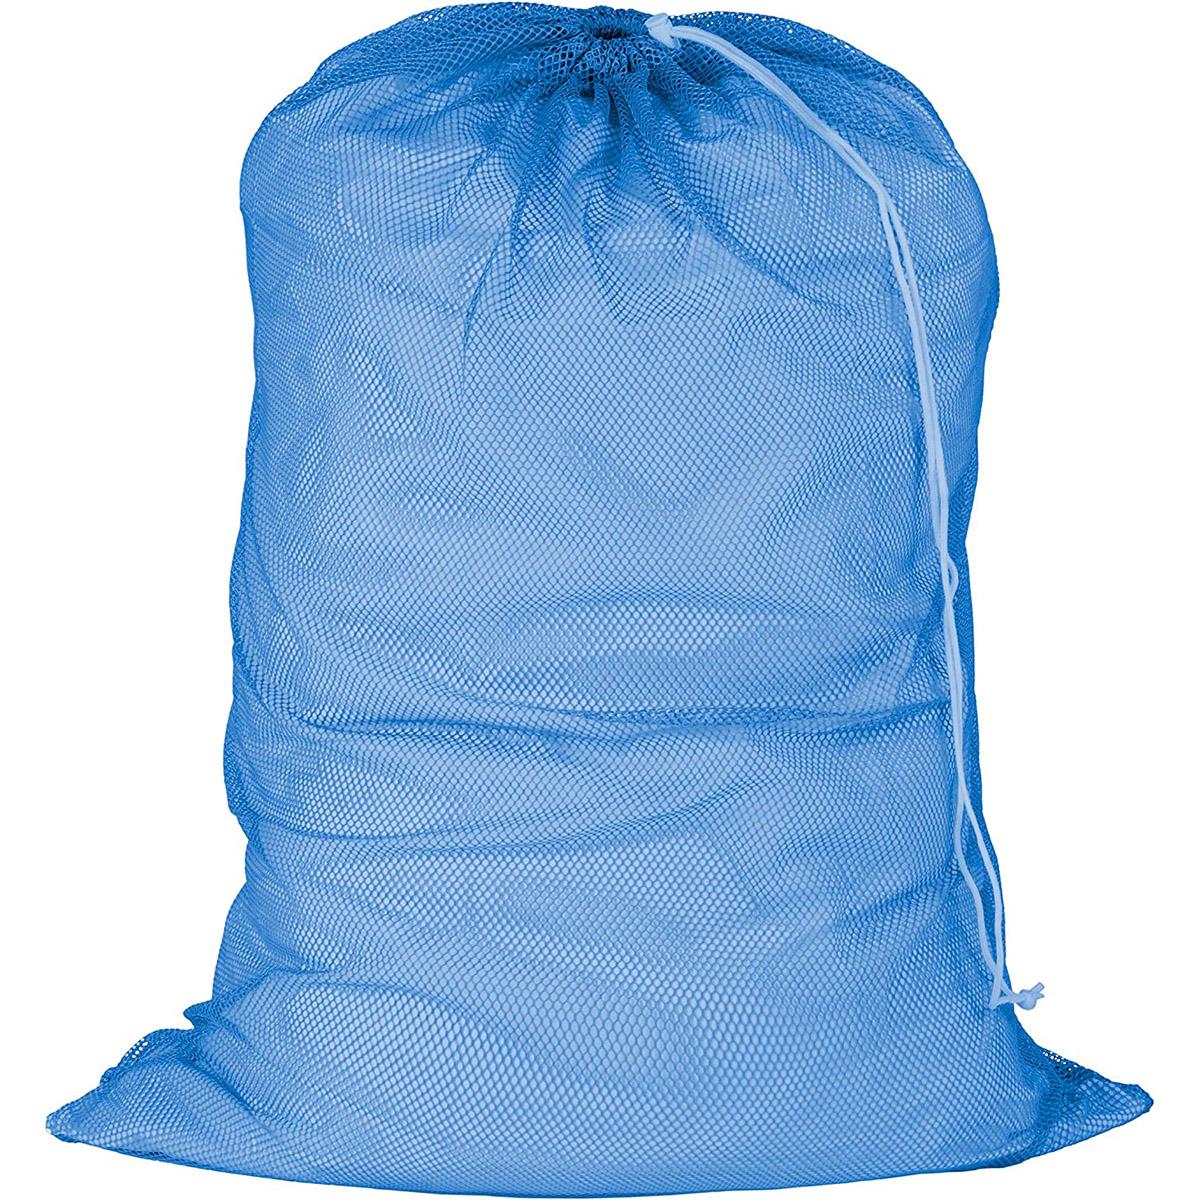 Honey-Can-Do Mesh Laundry Bag with Drawstring for $2.99